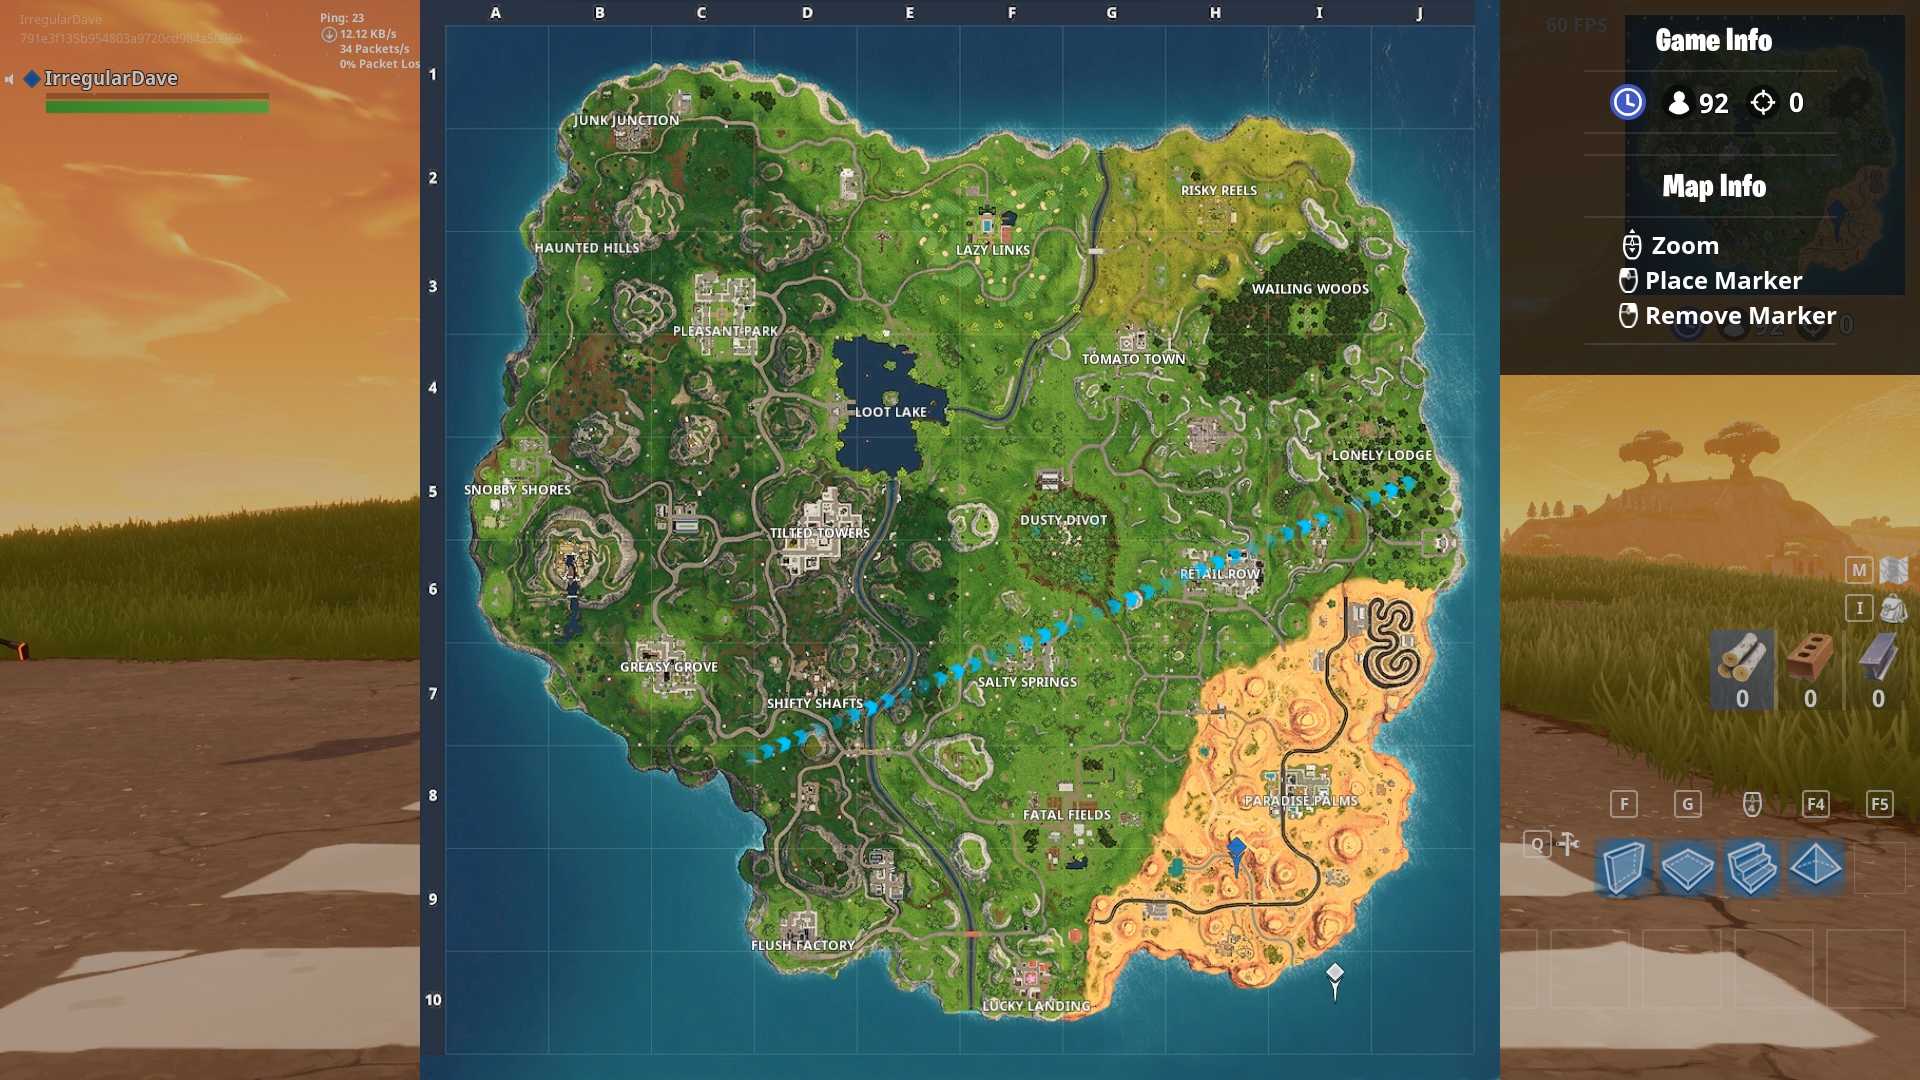 Fortnite Challenge Guide For Season 5: Where To Search Between An Oasis, Rock Archway, And Dinosaurs (Week 2)